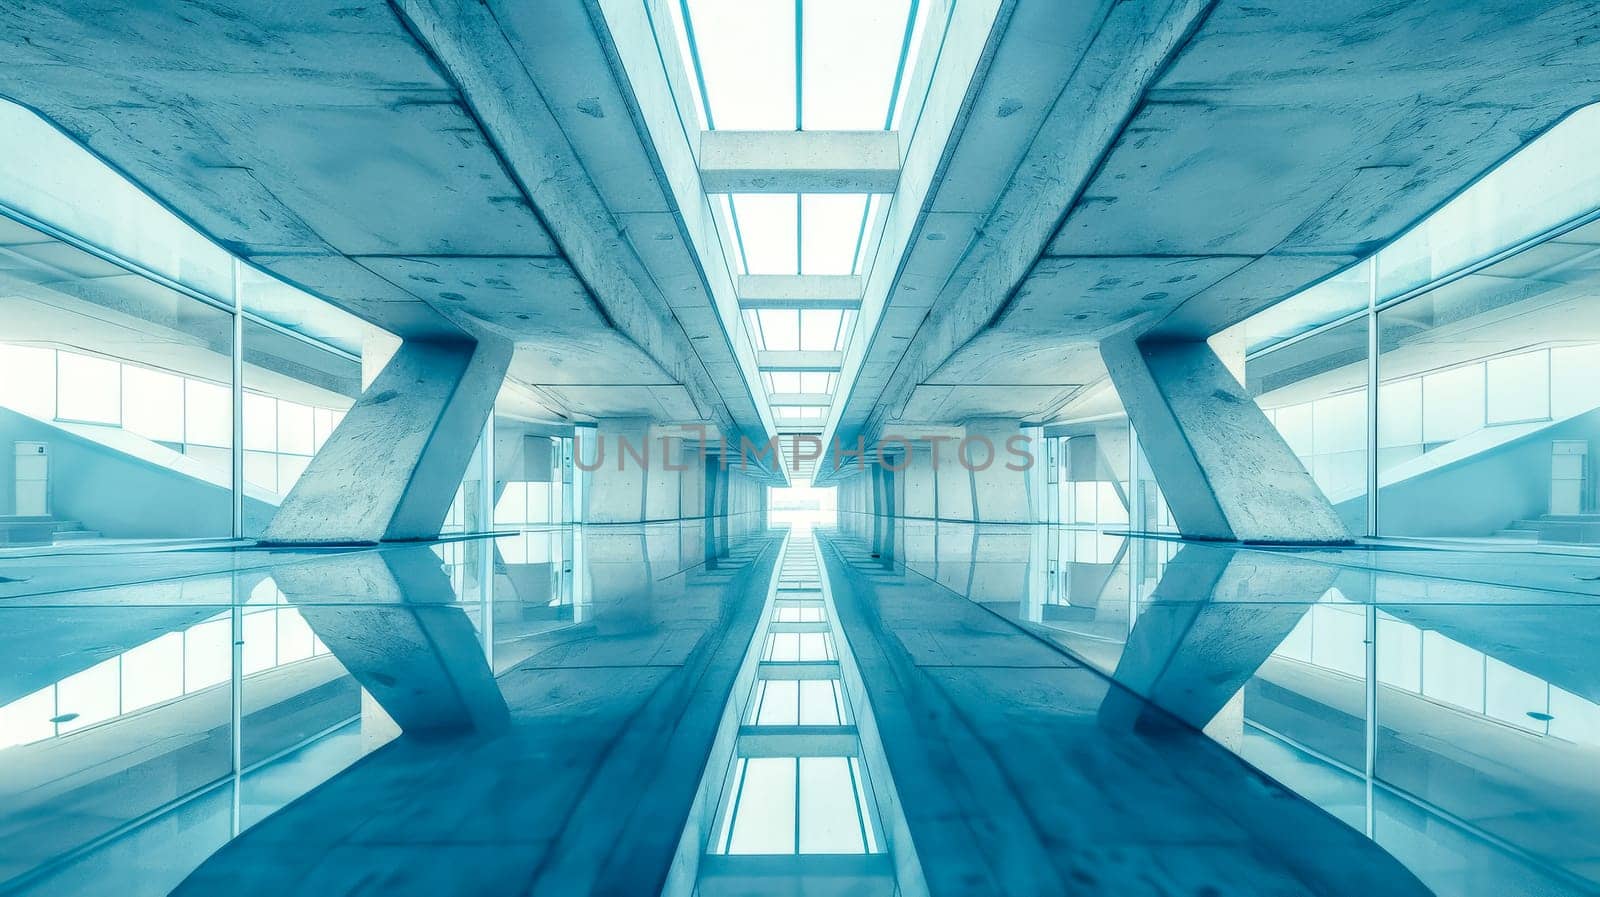 Symmetrical futuristic blue-toned architectural corridor with minimalistic abstract design and geometric lines. Featuring cool blue tones. Empty vanishing point